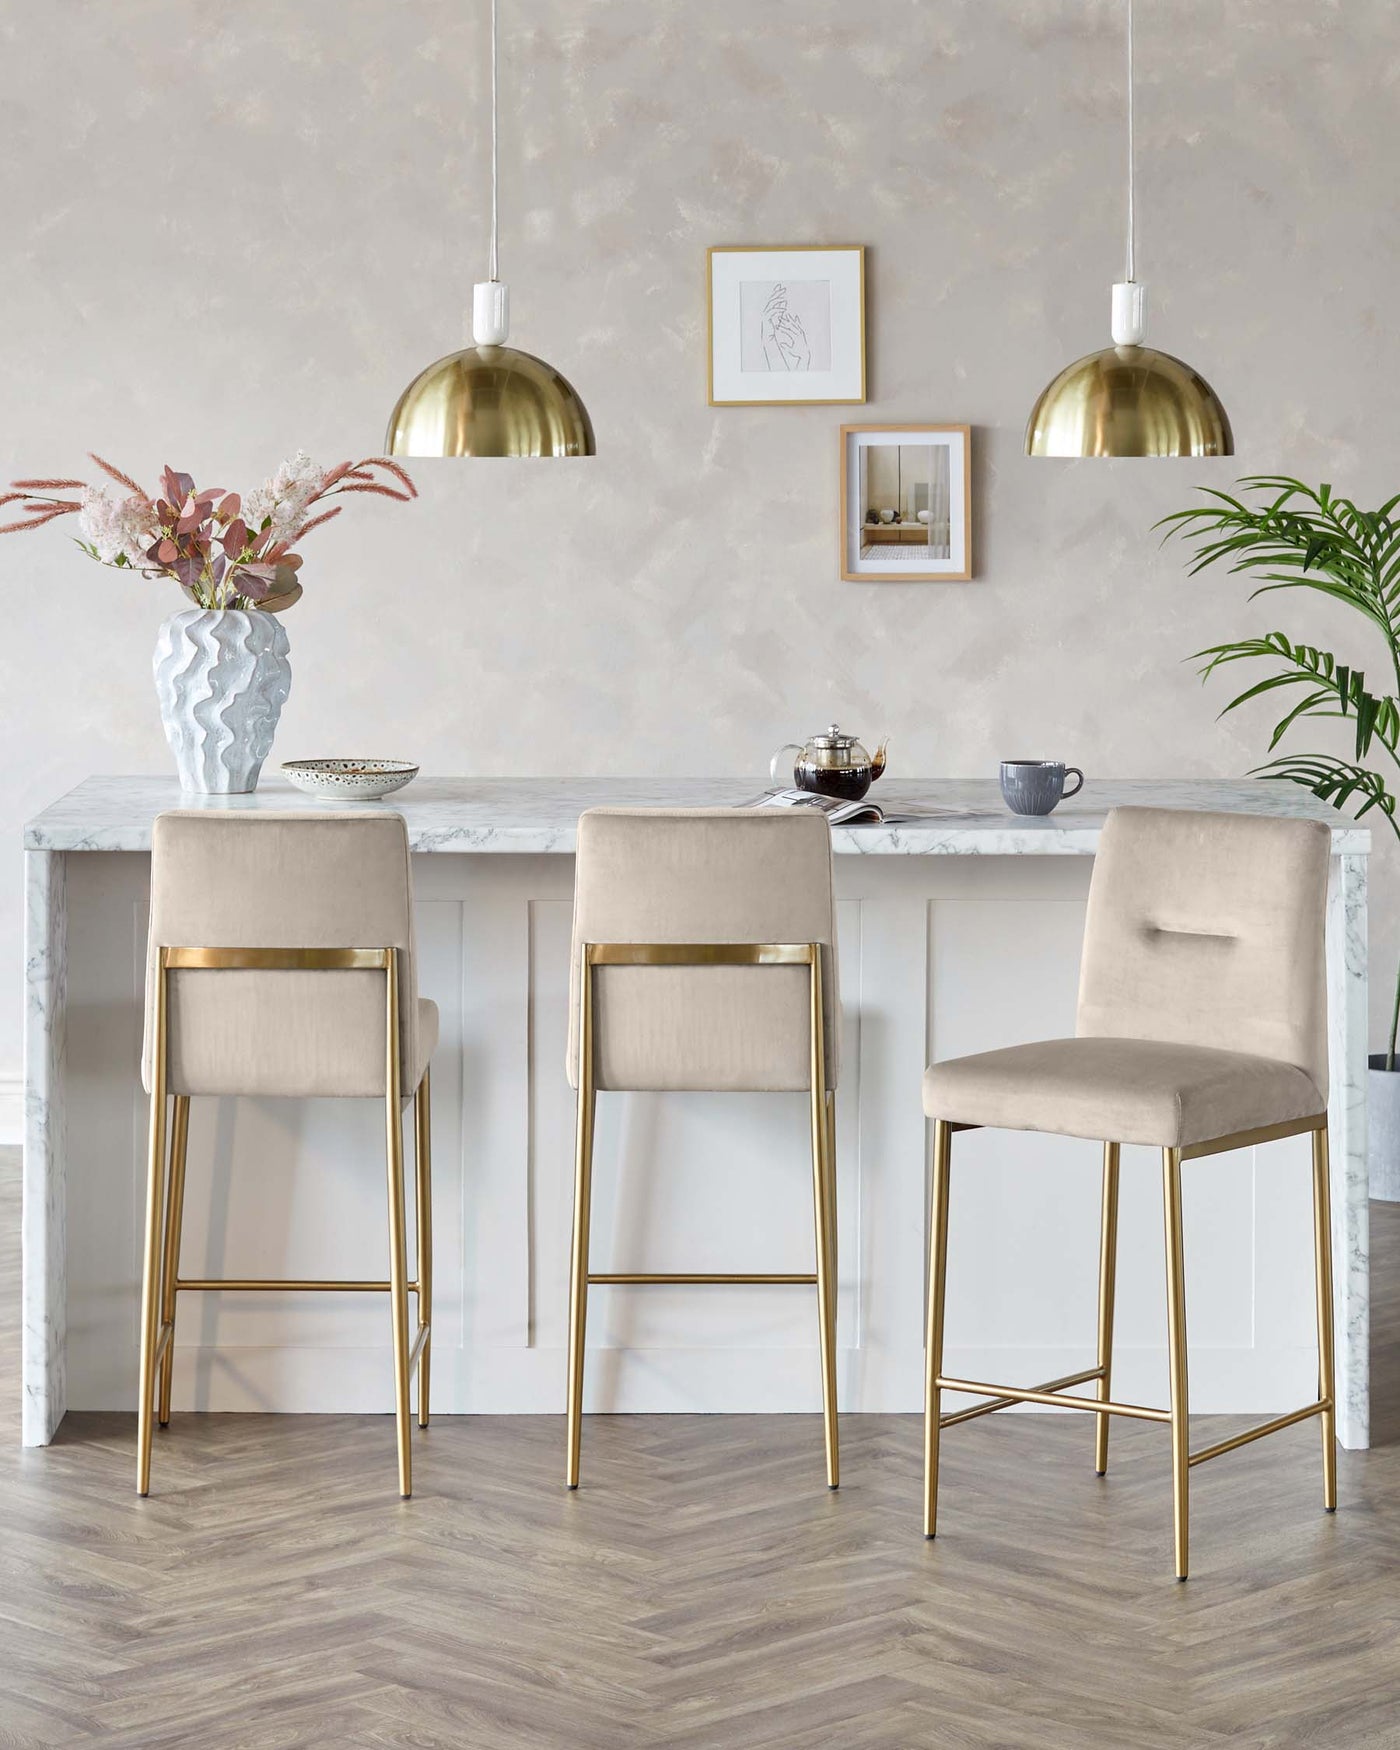 Elegant modern kitchen space featuring a white marble-top bar table with gold-finished legs and three taupe upholstered bar stools with sleek gold frames.